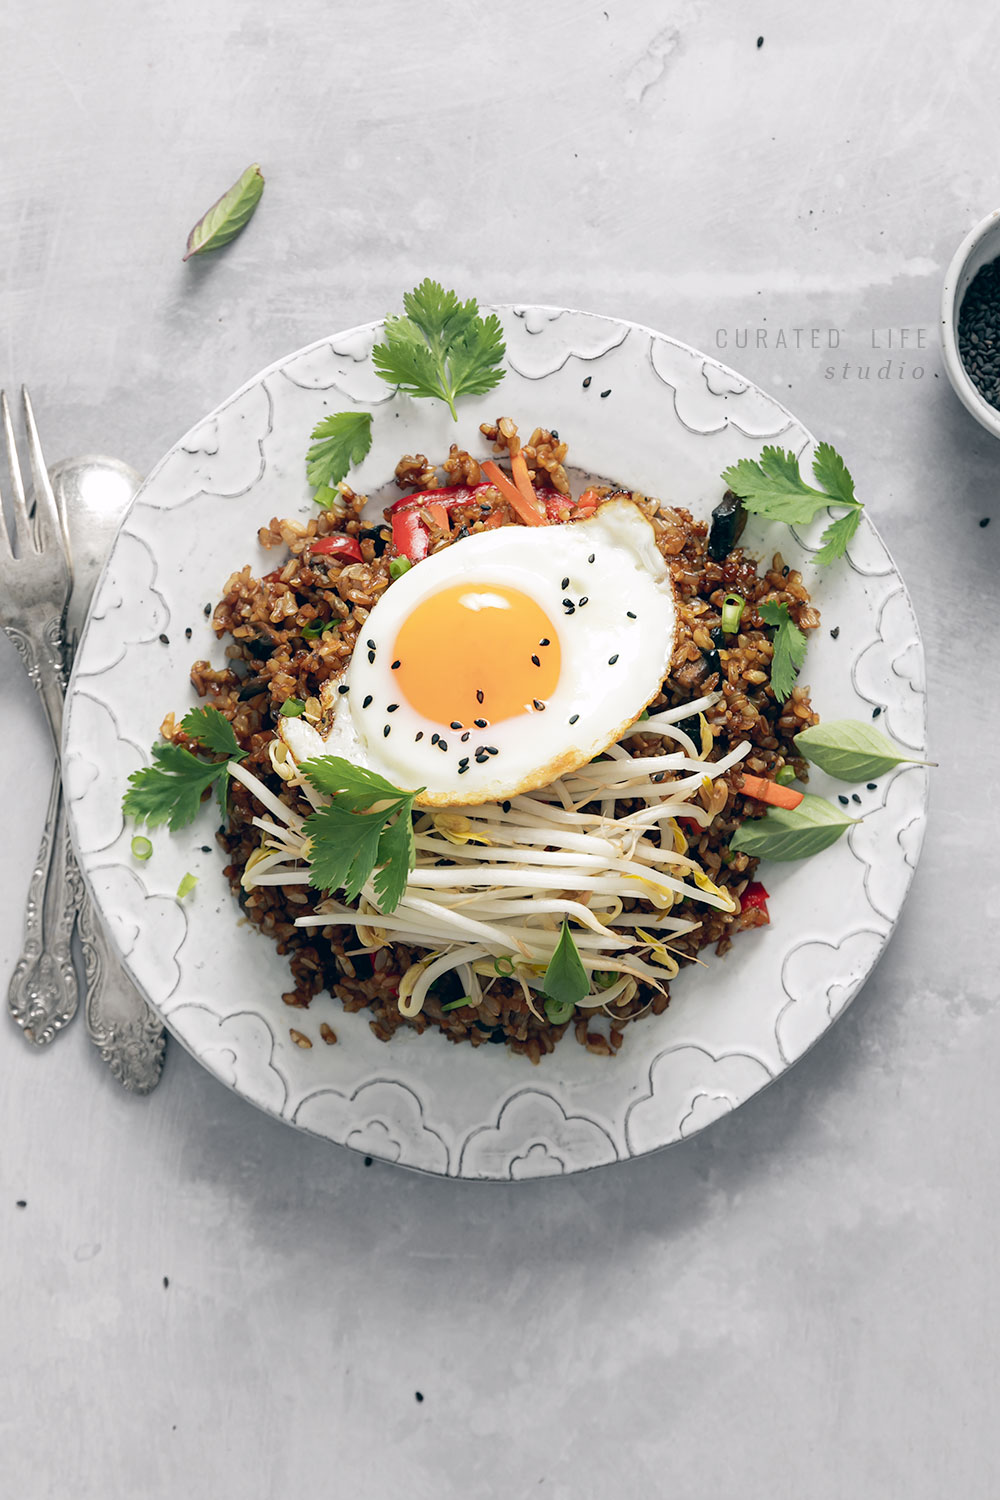 Packed with vegetables, this healthy Brown Rice Fried Rice is easy to prepare making it a perfect vegetarian weeknight meal! Gluten Free + easily adaptable to be vegan.

#fried #rice #recipe #vegetarian #vegan #gluten-free #easy #egg #vegetable #veggie #how-to-make #homemade 